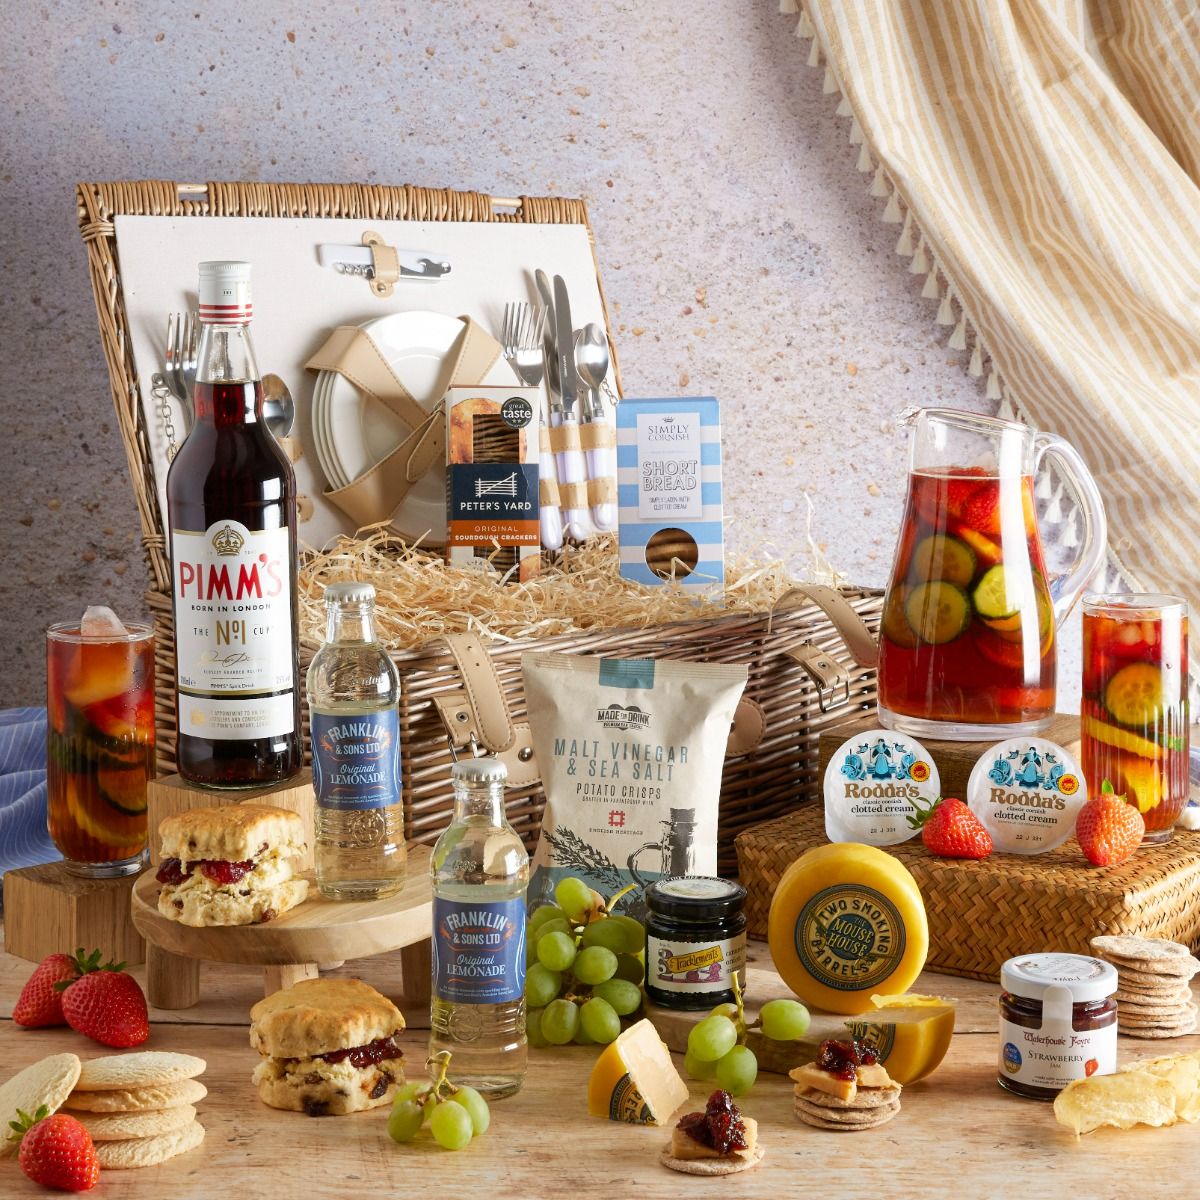 British Summer Pimms Hamper with content on display